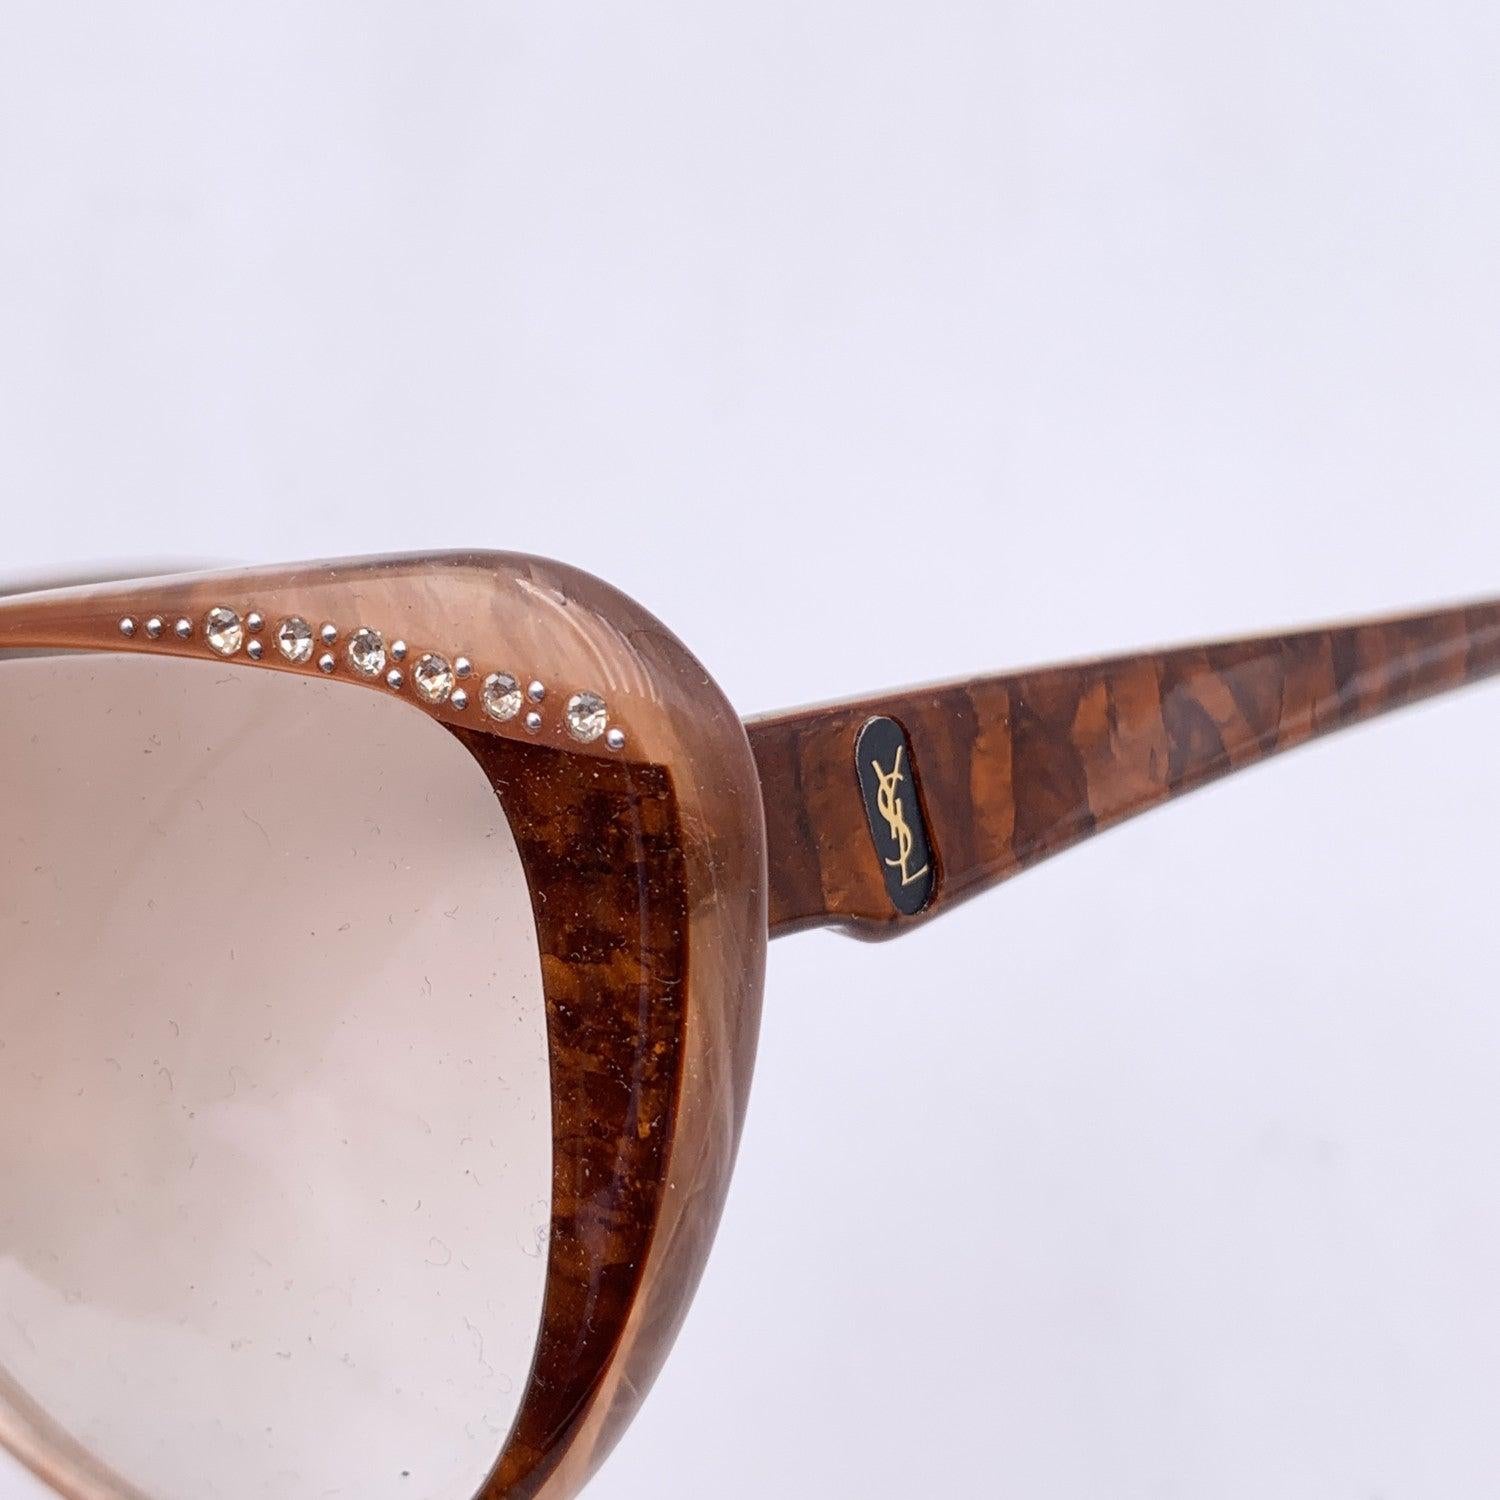 Yves Saint Laurent Vintage Cat Eye Sunglasses 8704 PO 74 50/20 125mm In Excellent Condition For Sale In Rome, Rome